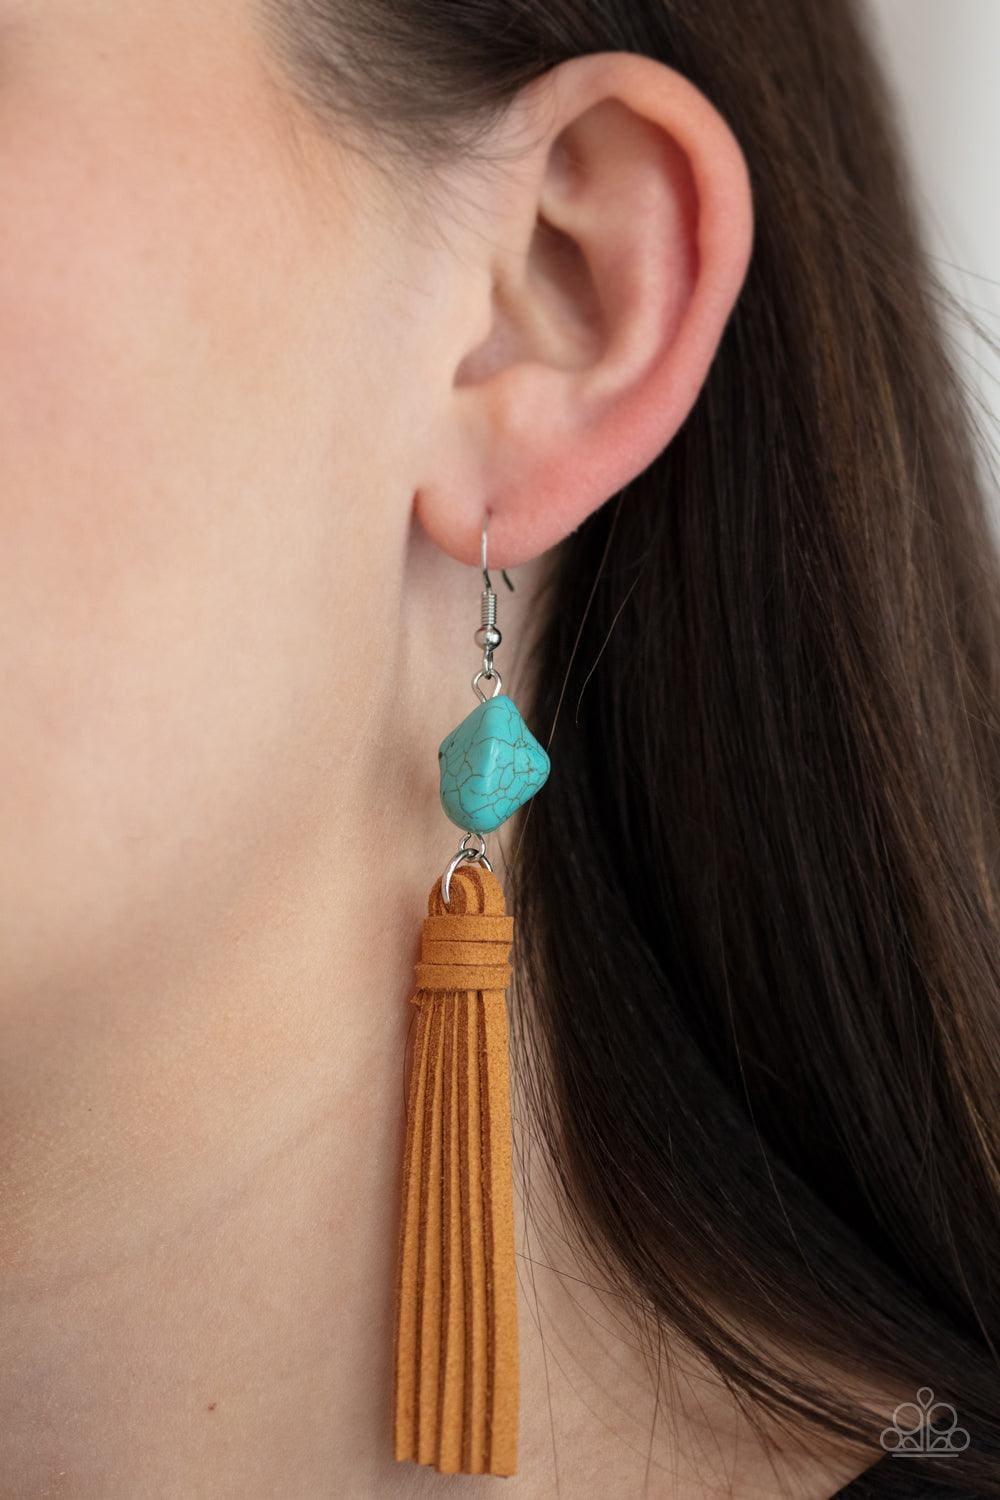 Paparazzi Accessories - All-natural Allure - Blue Earrings - Bling by JessieK